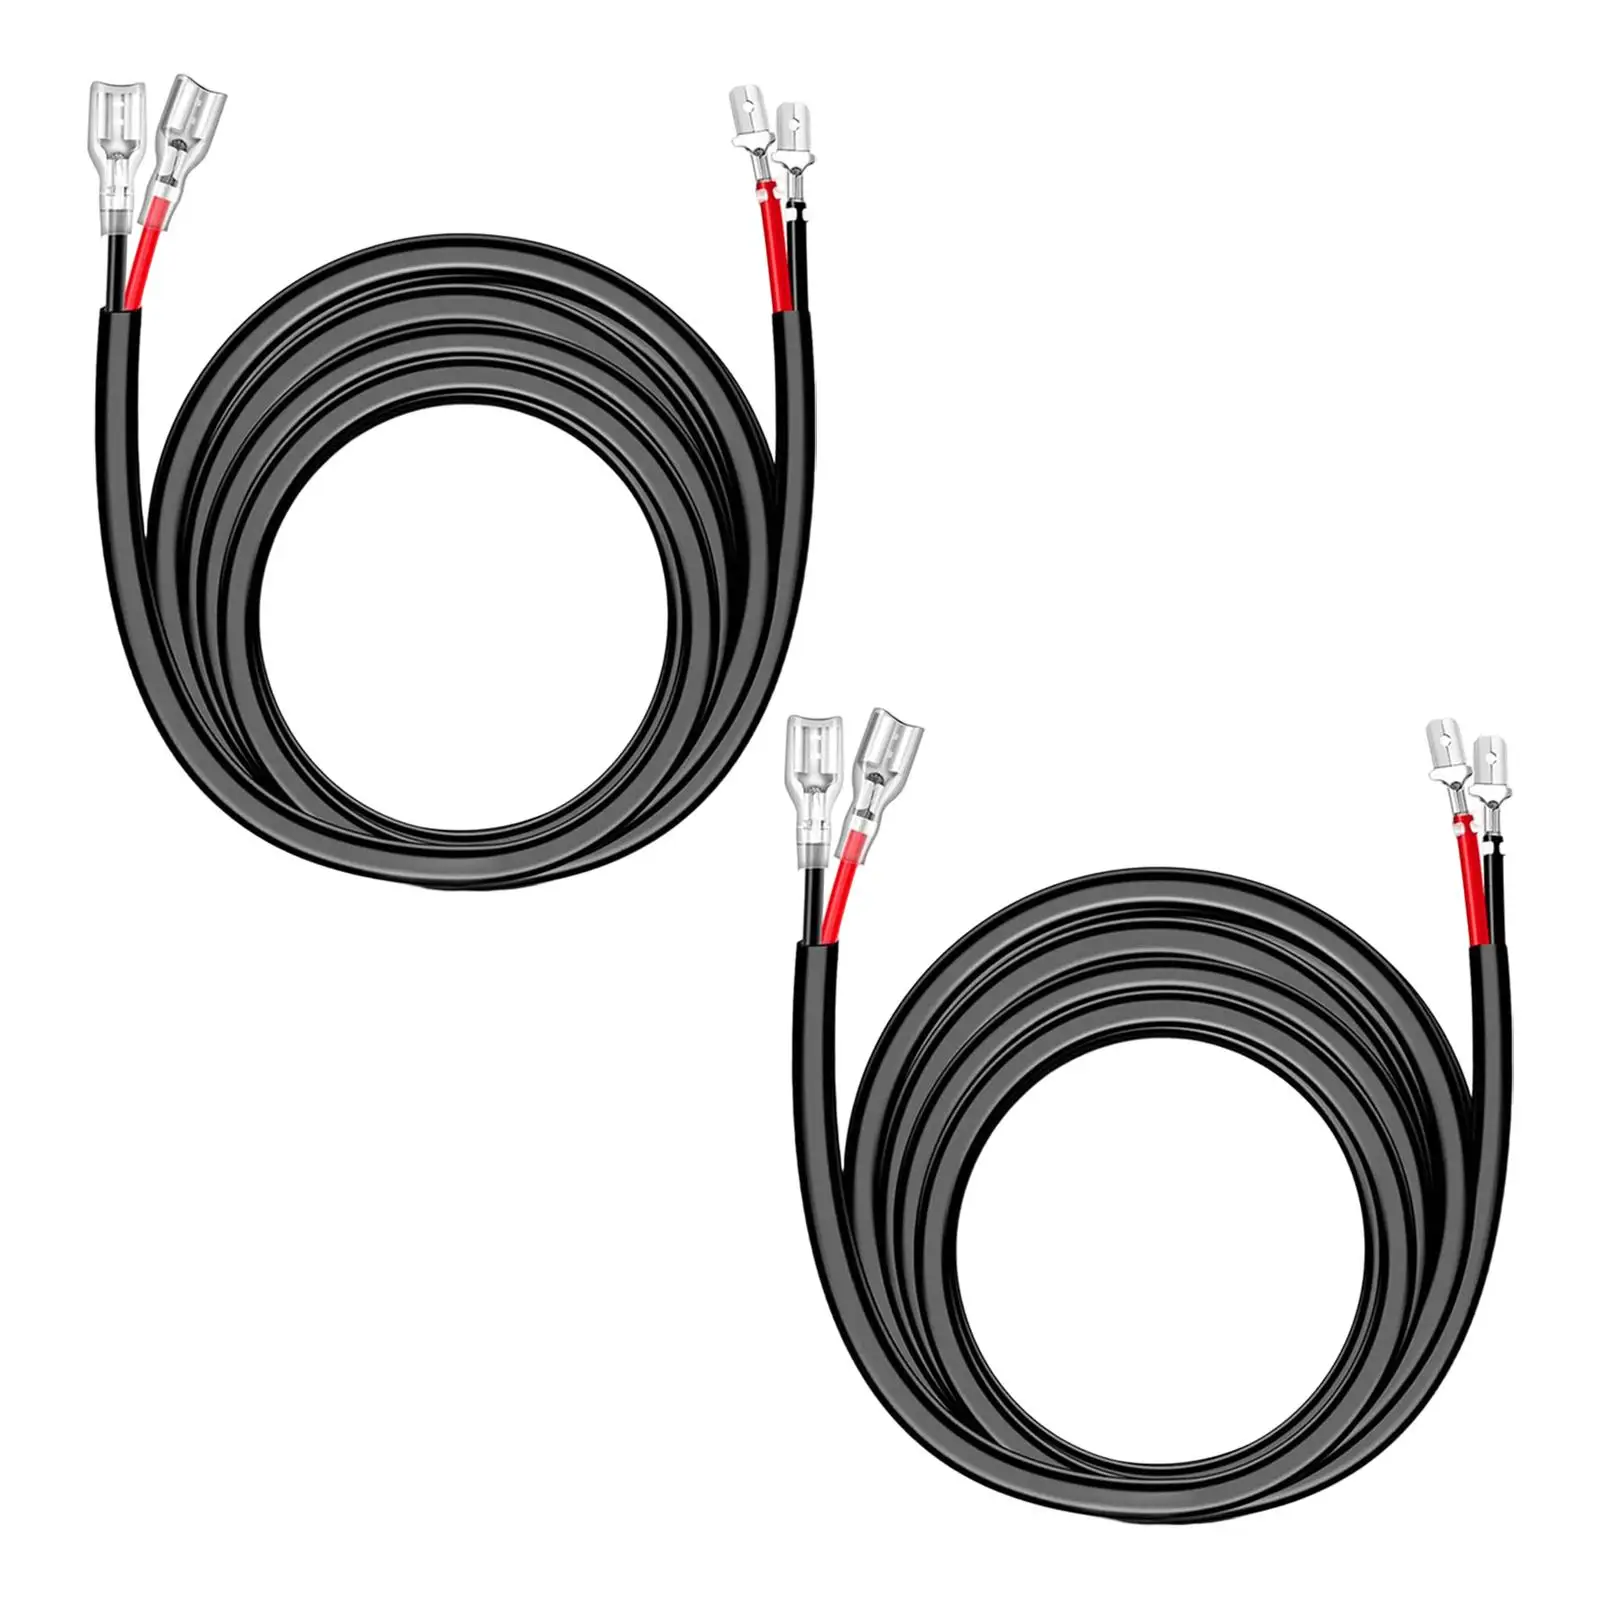 2x 16 Gauge Extension Wiring Harness 300cm High Performance for Work Lamp Yachts Motorcycle Household Appliances Trailer